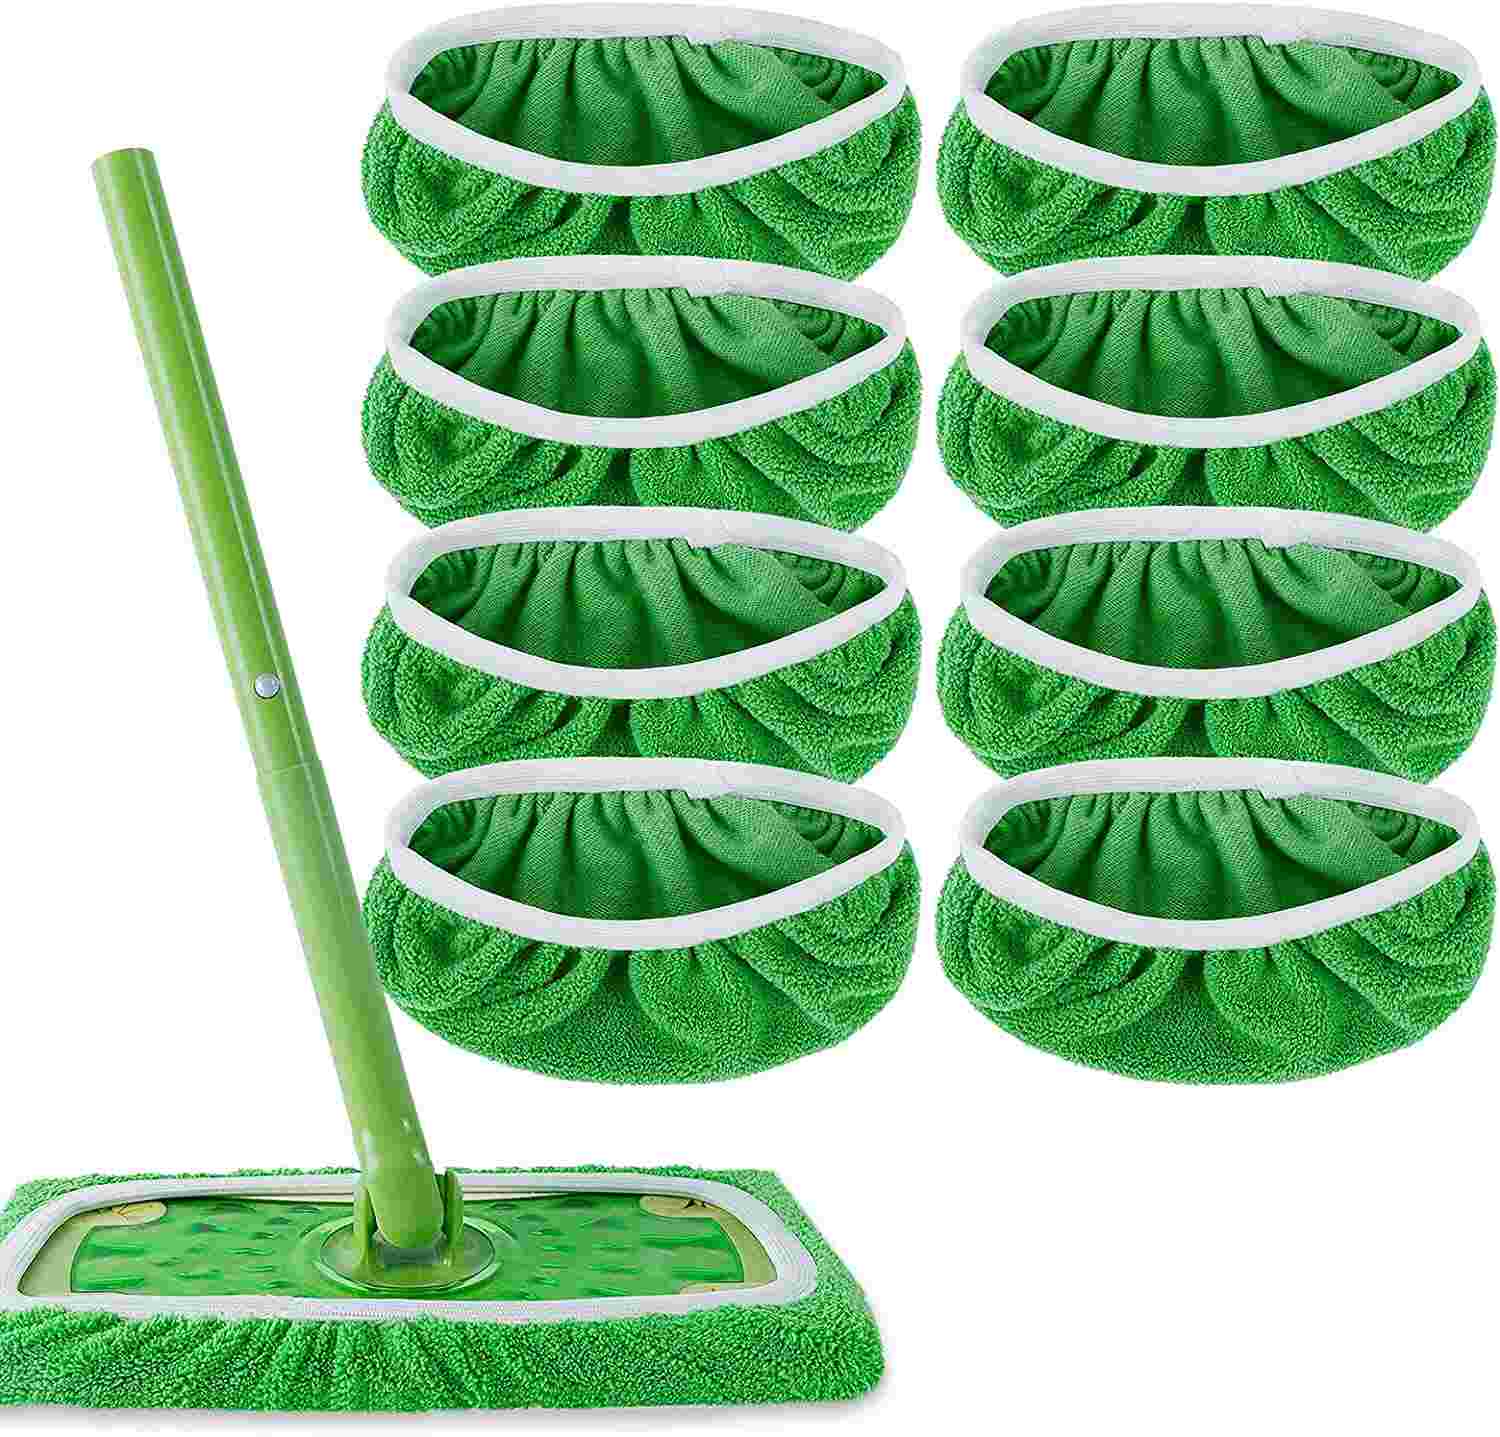 KEEPOW Replacement Pads for Swiffer Sweeper Mop, 8 Pack, Green